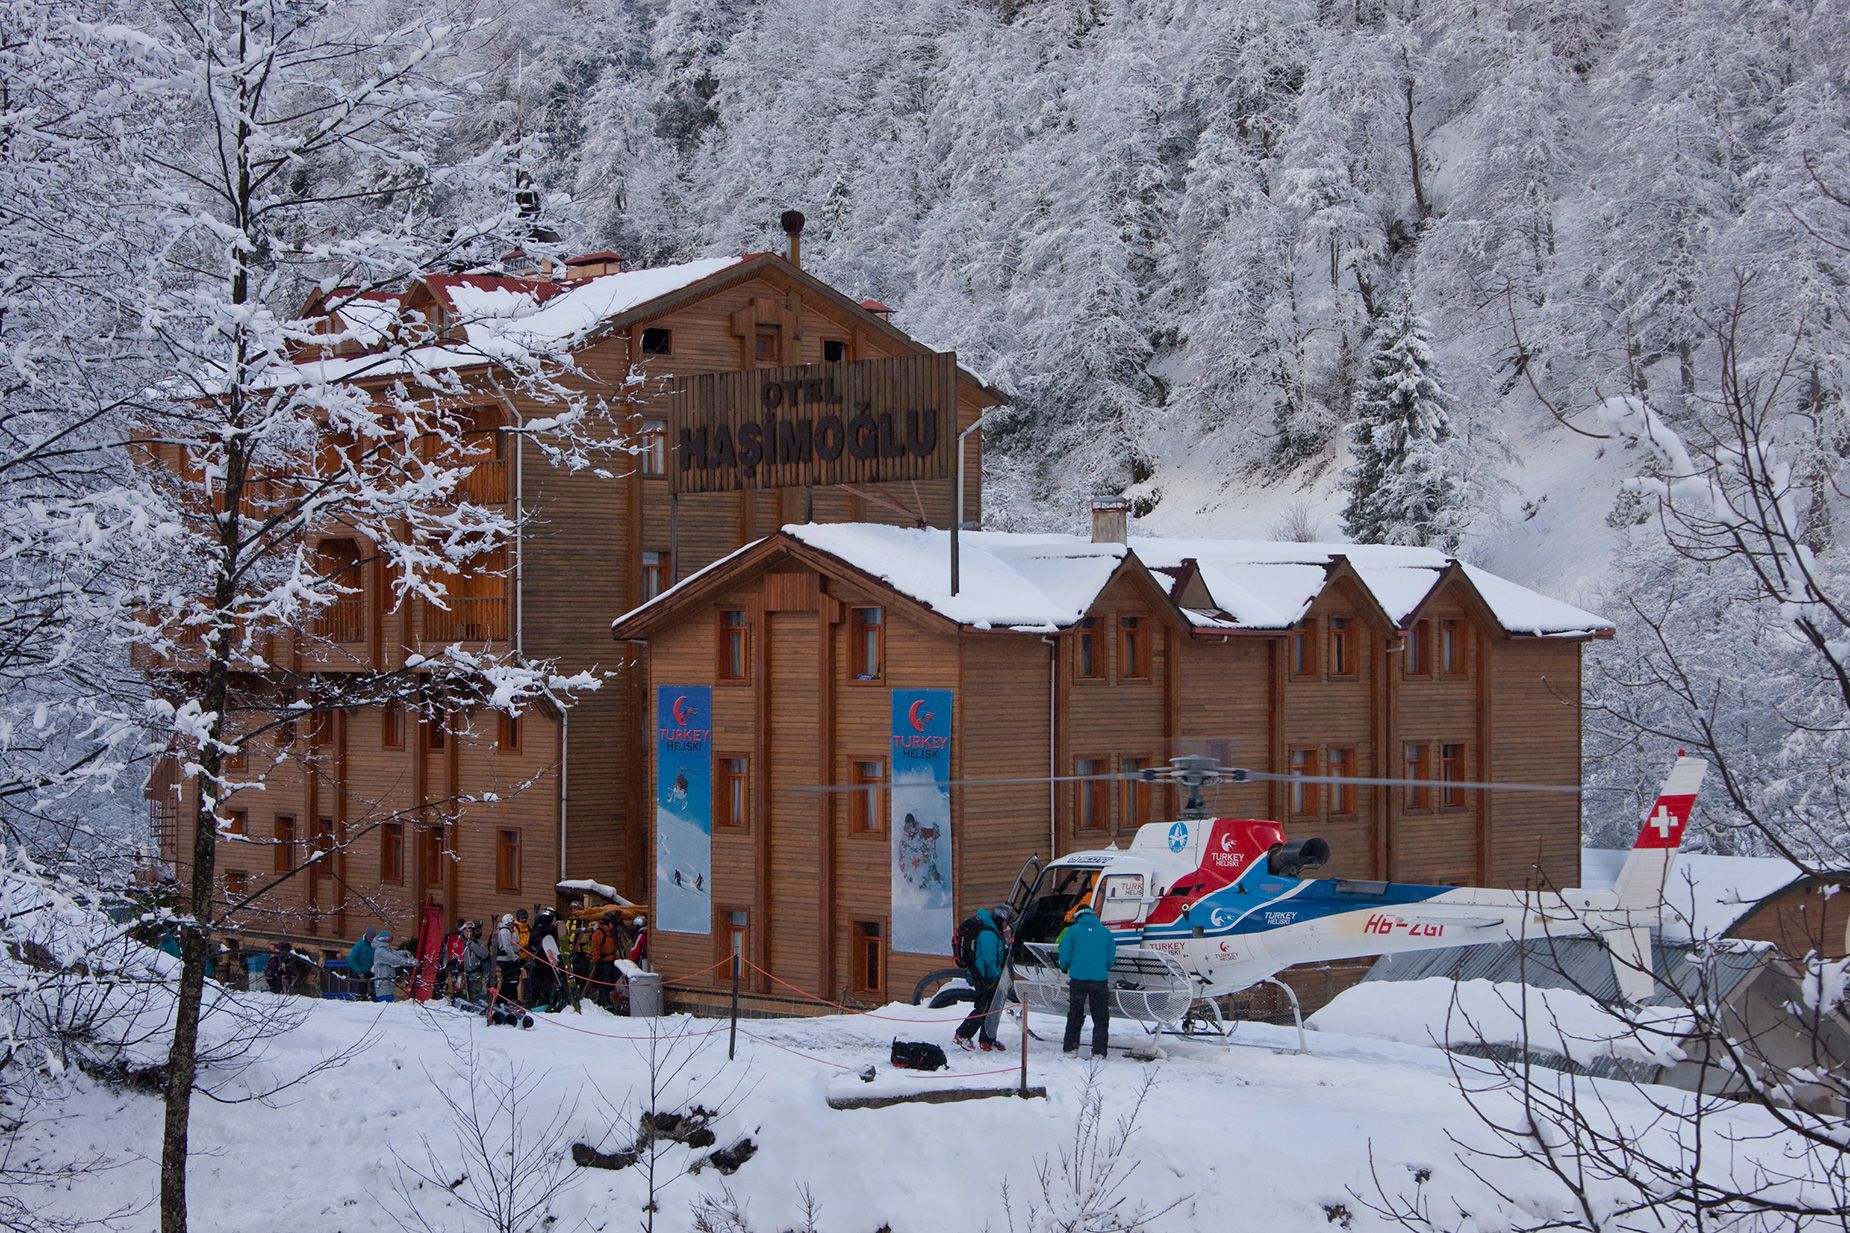 Apres ski here is low key, with hot baths, games of table tennis or massages.